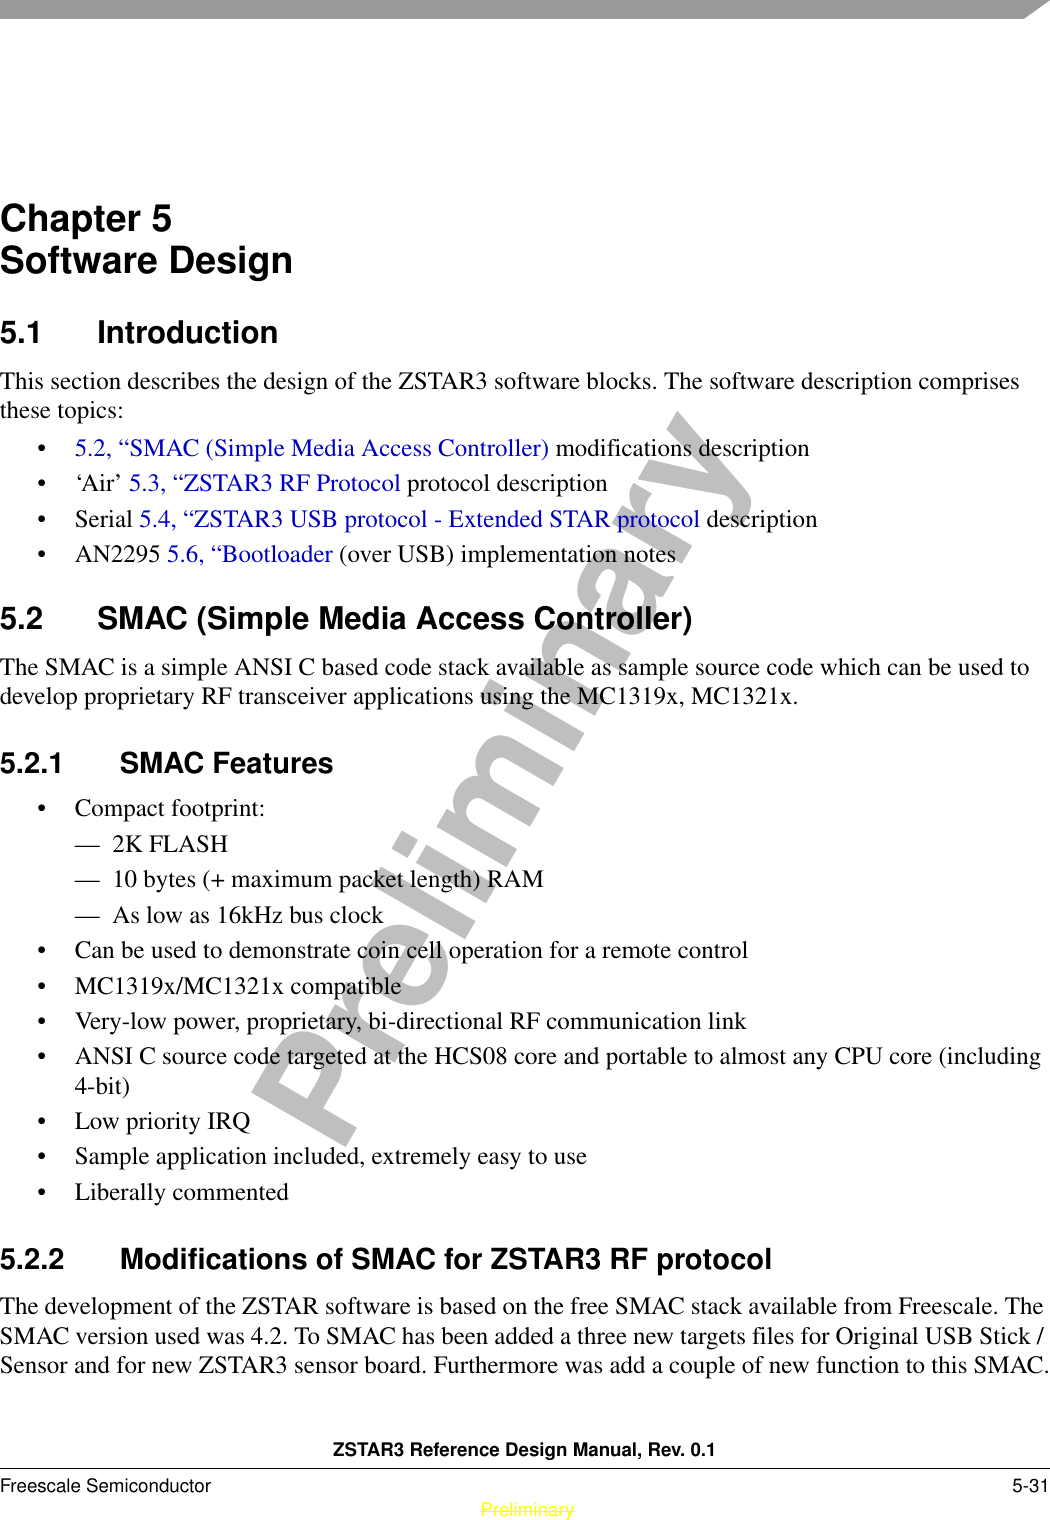 ZSTAR3 Reference Design Manual, Rev. 0.1Freescale Semiconductor 5-31 PreliminaryPreliminaryChapter 5  Software Design5.1 IntroductionThis section describes the design of the ZSTAR3 software blocks. The software description comprises these topics:•5.2, “SMAC (Simple Media Access Controller) modifications description•‘Air’ 5.3, “ZSTAR3 RF Protocol protocol description•Serial 5.4, “ZSTAR3 USB protocol - Extended STAR protocol description• AN2295 5.6, “Bootloader (over USB) implementation notes5.2 SMAC (Simple Media Access Controller)The SMAC is a simple ANSI C based code stack available as sample source code which can be used to develop proprietary RF transceiver applications using the MC1319x, MC1321x.5.2.1 SMAC Features• Compact footprint:— 2K FLASH— 10 bytes (+ maximum packet length) RAM— As low as 16kHz bus clock• Can be used to demonstrate coin cell operation for a remote control• MC1319x/MC1321x compatible• Very-low power, proprietary, bi-directional RF communication link• ANSI C source code targeted at the HCS08 core and portable to almost any CPU core (including 4-bit)• Low priority IRQ• Sample application included, extremely easy to use• Liberally commented5.2.2 Modifications of SMAC for ZSTAR3 RF protocolThe development of the ZSTAR software is based on the free SMAC stack available from Freescale. The SMAC version used was 4.2. To SMAC has been added a three new targets files for Original USB Stick / Sensor and for new ZSTAR3 sensor board. Furthermore was add a couple of new function to this SMAC.